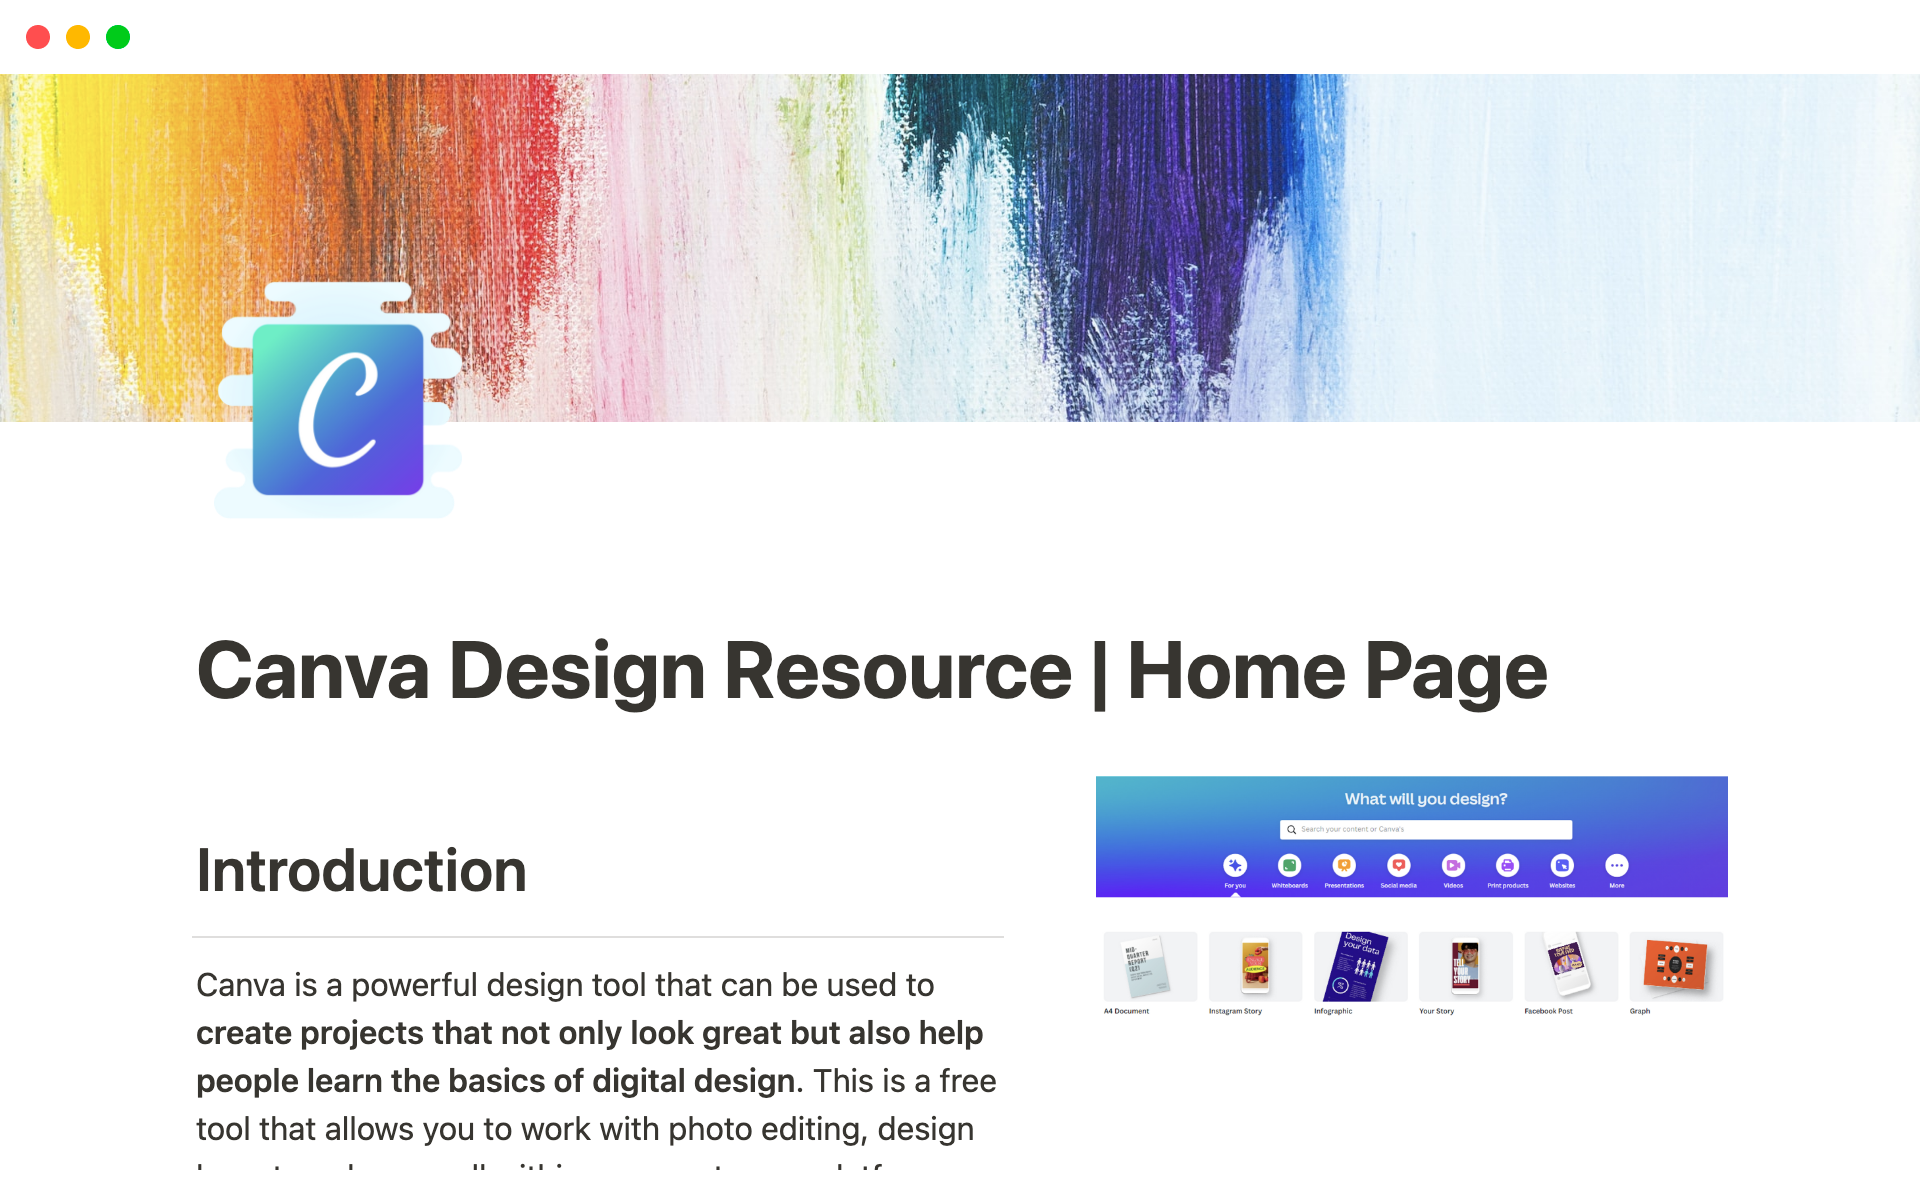 The resource provides numerous tips & tricks to help you use Canva more effectively and contains a handful of design ideas, templates & helpful resources.